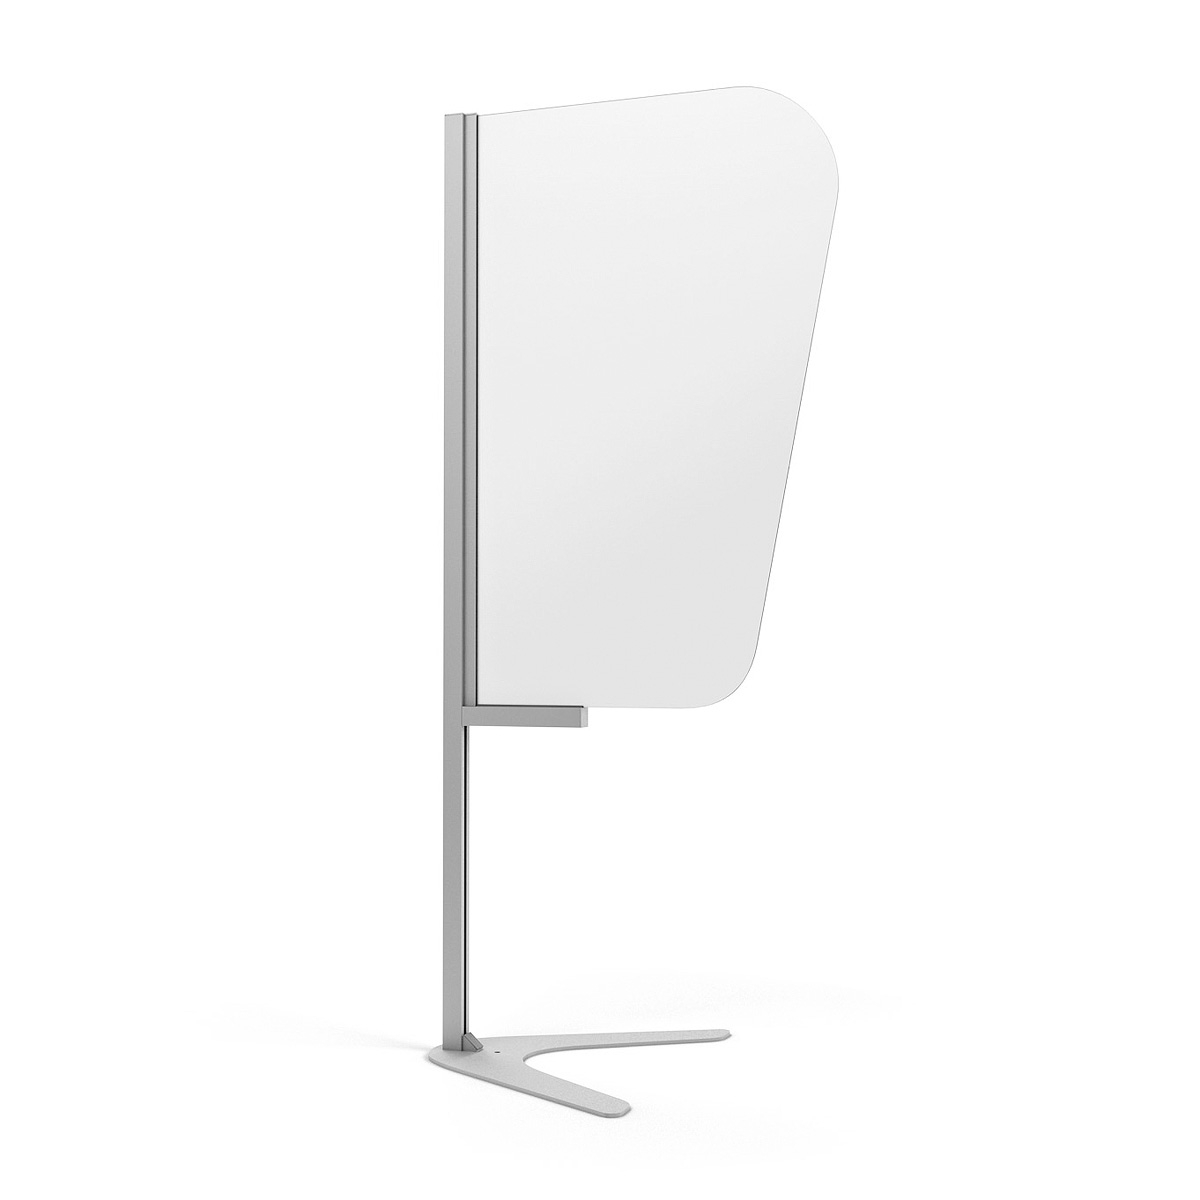 ACHOO® Patient Waiting Room Divider Screen With Frosted Perspex Surface